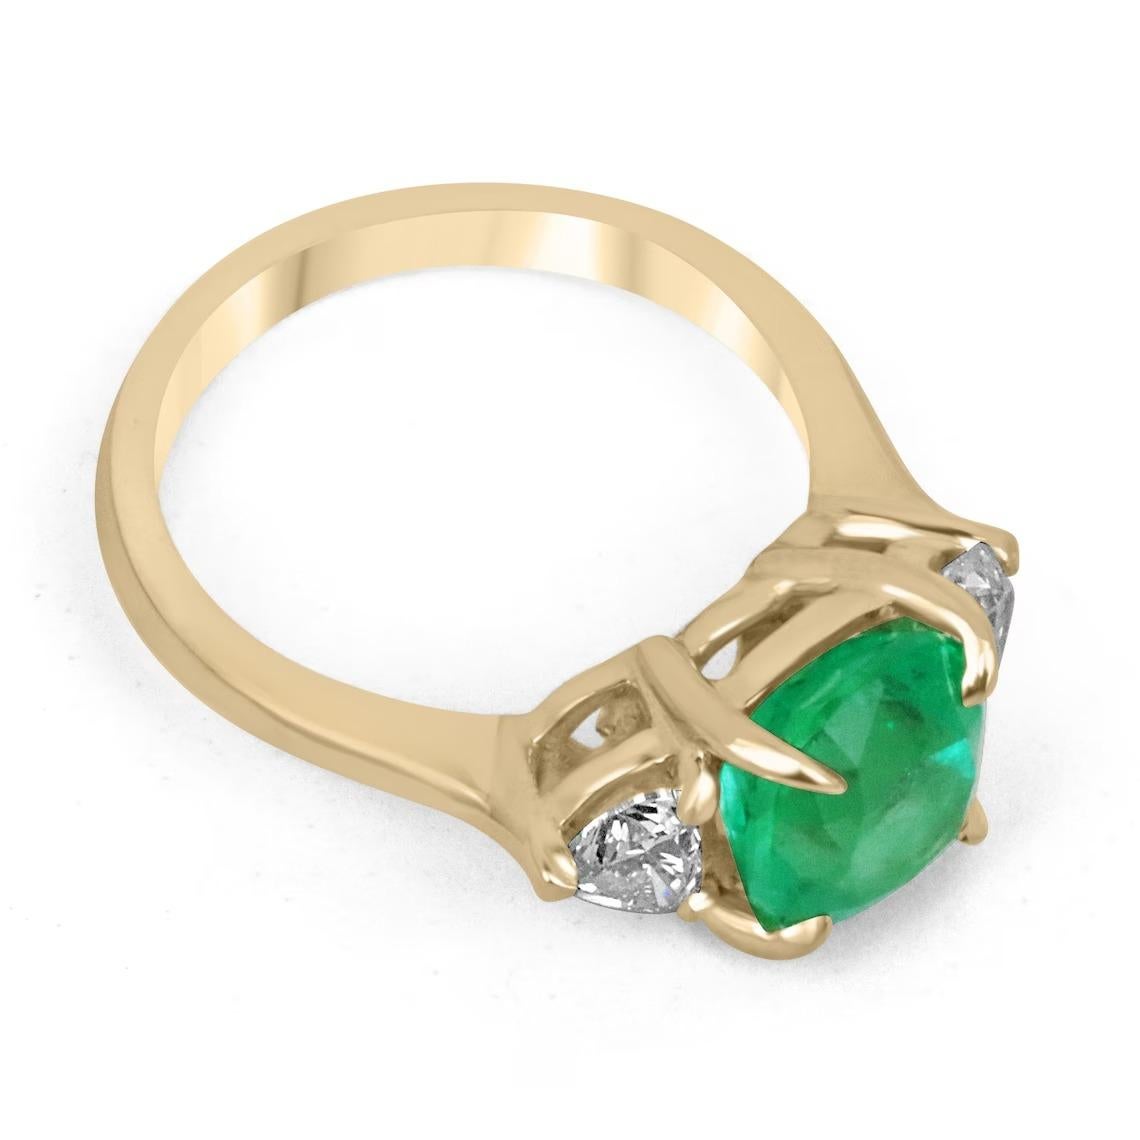 A majestic emerald and diamond three-stone right-hand/engagement ring. The center stone showcases a remarkable, natural cushion-cut fine quality ethically sourced Colombian emerald of high quality. The gemstone displays an enthralling, vivacious,